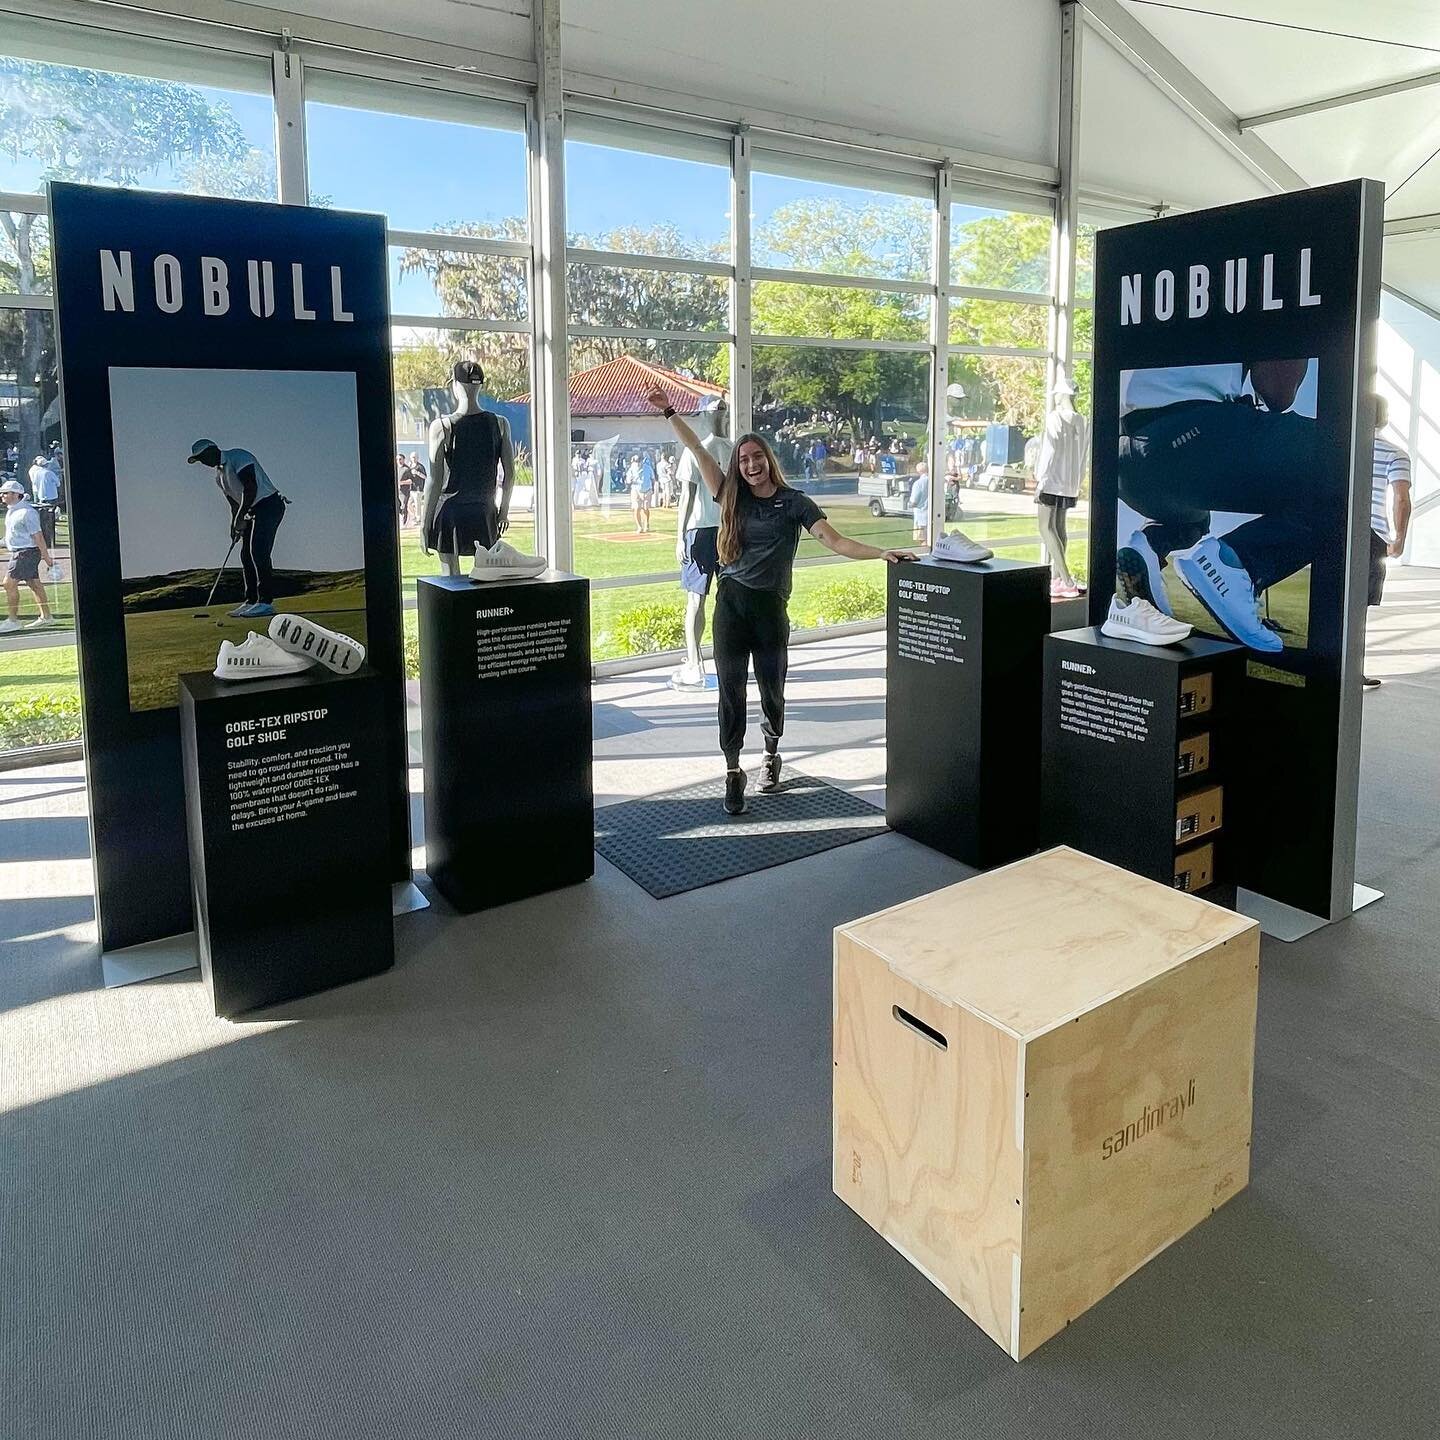 🖤⛳️🤍This past week I worked a few @nobull activations at @theplayerschamp in Ponte Vedra, Florida. I was assisting customers with finding their perfect shoe size and explaining what this amazing training brand is all about. This is NOBULL&rsquo;s f